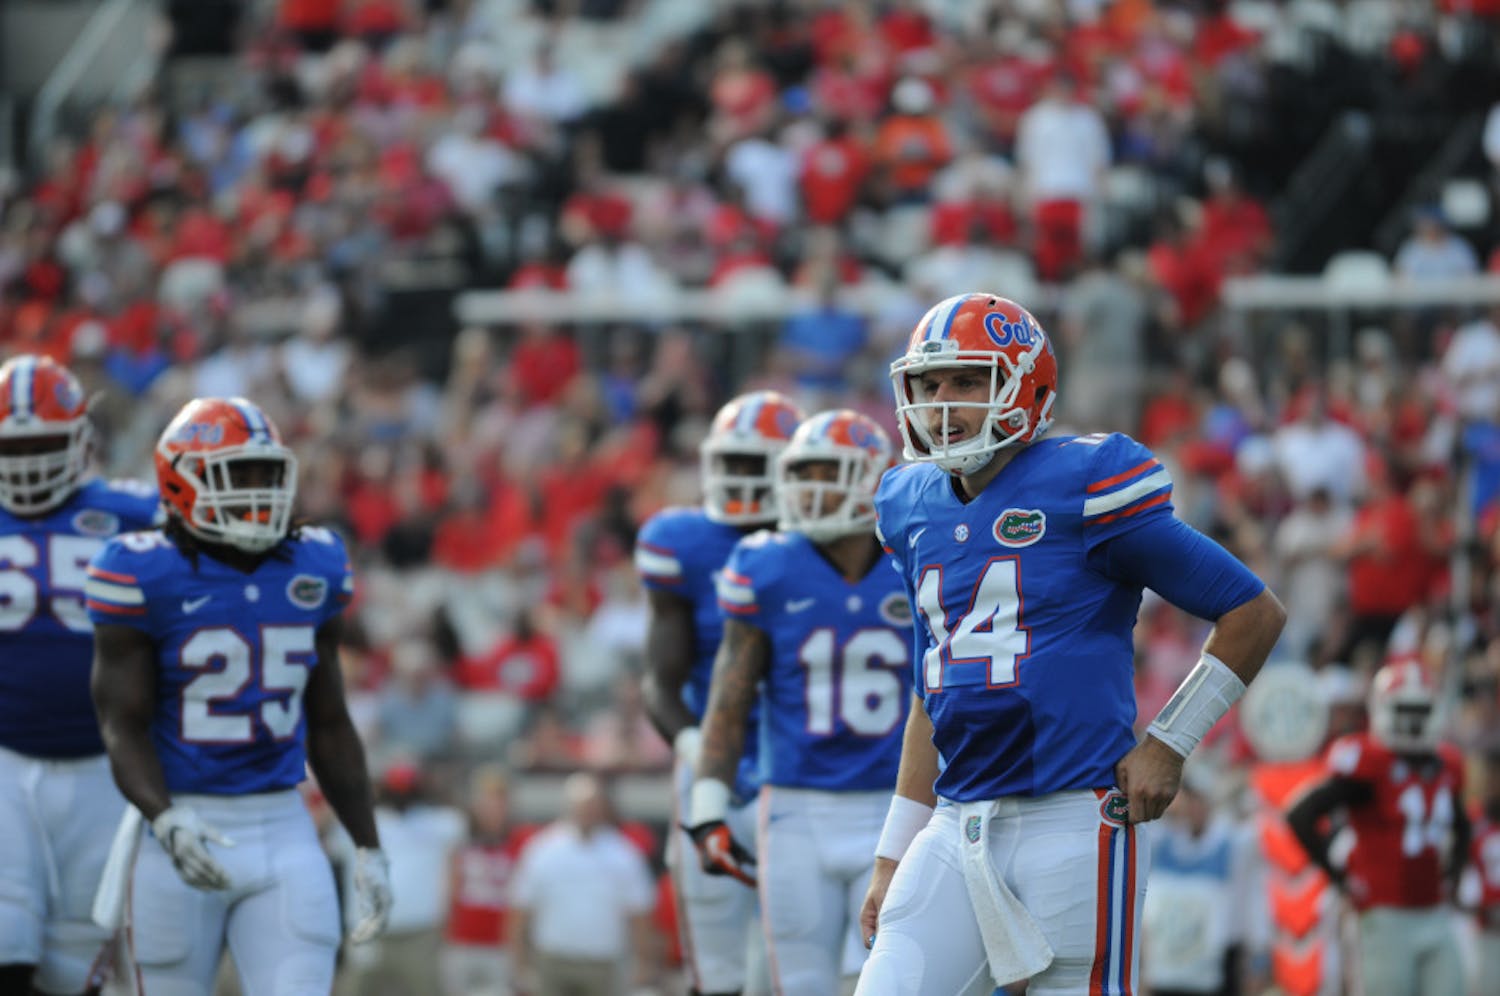 Luke Del Rio looks to the sideline for instruction during Florida's 24-10 win over Georgia on Oct. 29, 2016, in Jacksonville.